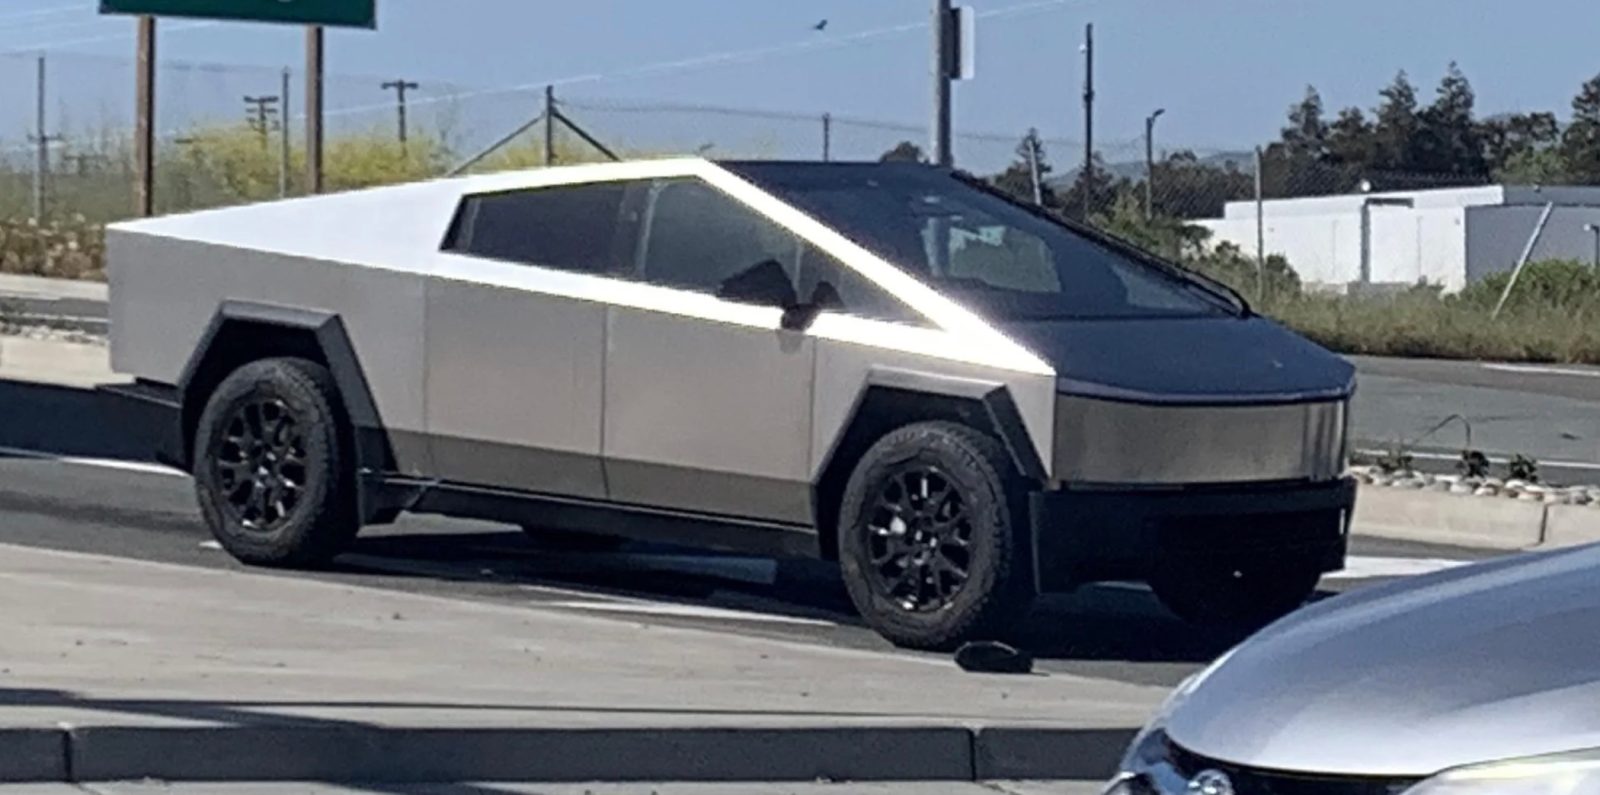 Tesla gives update on Cybertruck, claims first sub-19 ft pickup with 4 ...